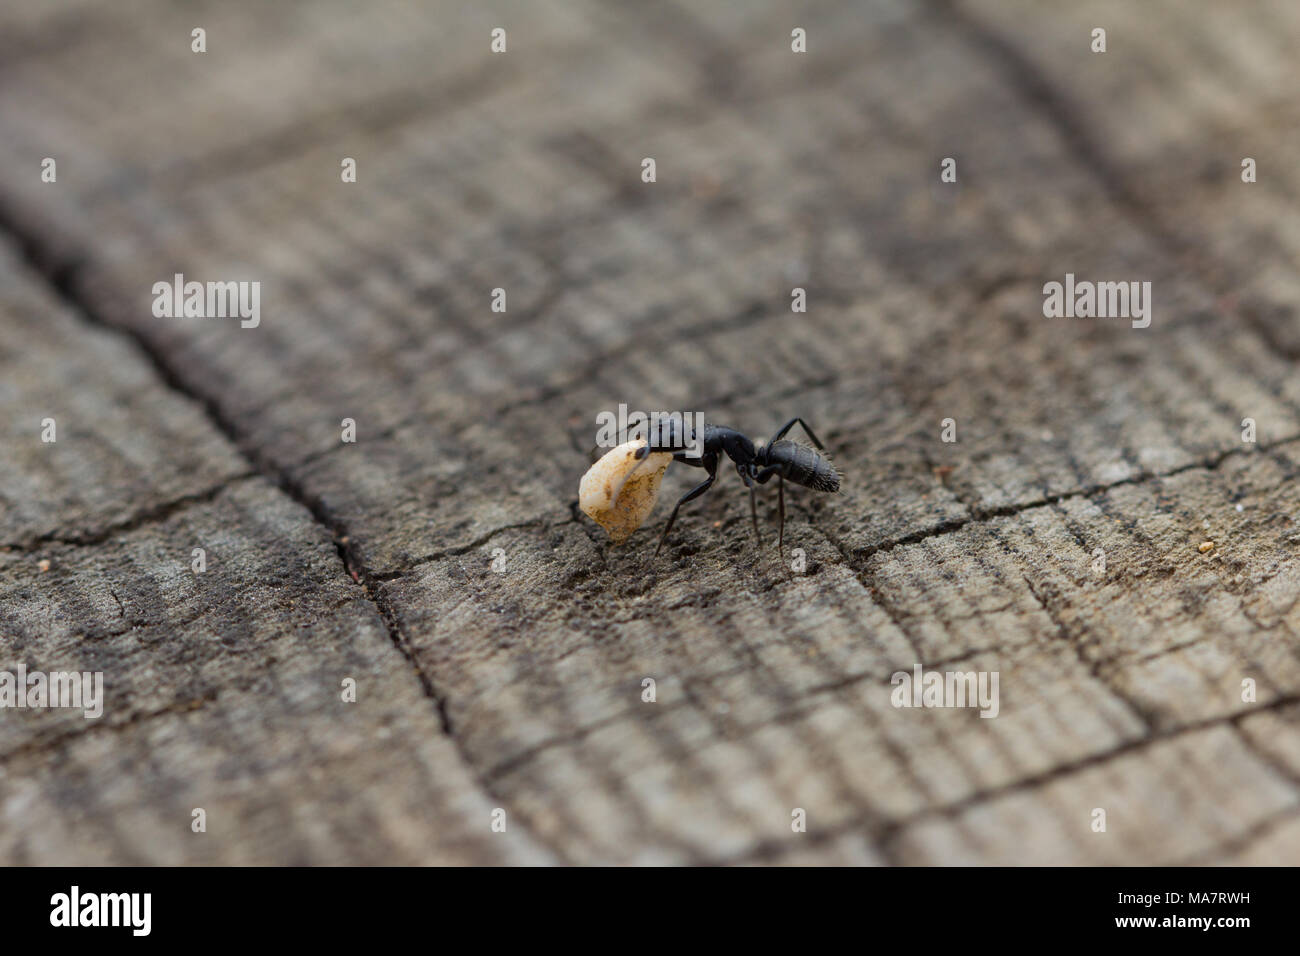 ant on wood background. image of a Stock Photo